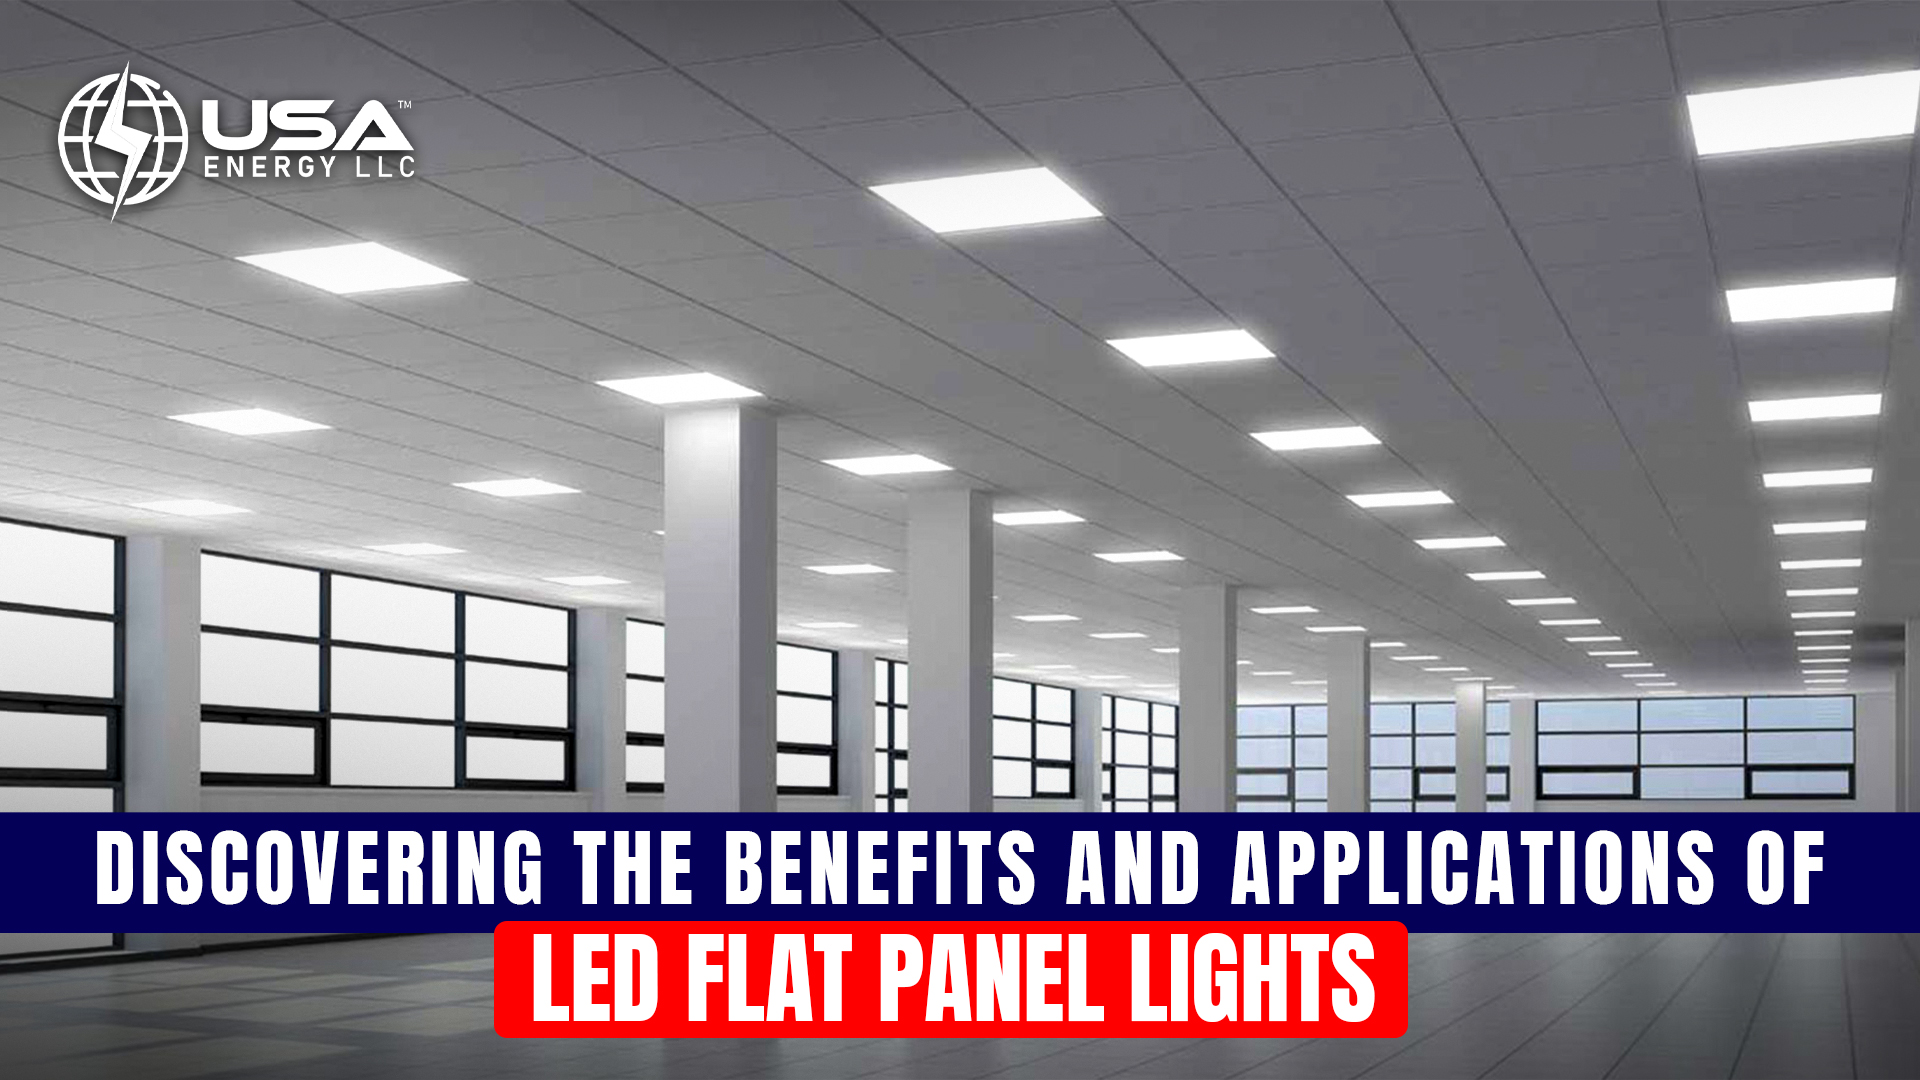 LED Ceiling Round Lights Guide: How to Choose the Best